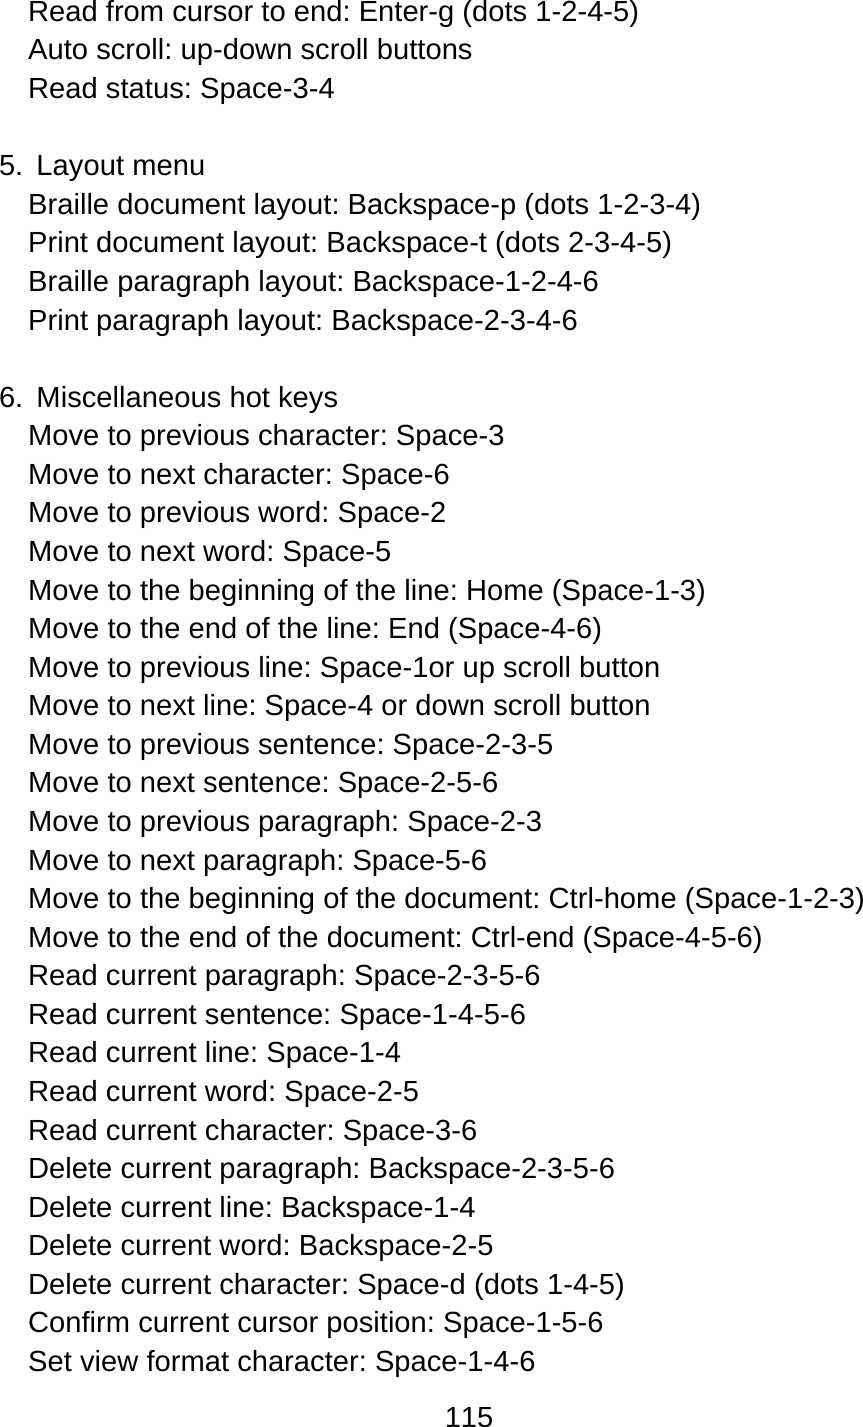 115  Read from cursor to end: Enter-g (dots 1-2-4-5) Auto scroll: up-down scroll buttons Read status: Space-3-4  5. Layout menu Braille document layout: Backspace-p (dots 1-2-3-4) Print document layout: Backspace-t (dots 2-3-4-5) Braille paragraph layout: Backspace-1-2-4-6 Print paragraph layout: Backspace-2-3-4-6  6. Miscellaneous hot keys Move to previous character: Space-3 Move to next character: Space-6 Move to previous word: Space-2 Move to next word: Space-5 Move to the beginning of the line: Home (Space-1-3) Move to the end of the line: End (Space-4-6) Move to previous line: Space-1or up scroll button Move to next line: Space-4 or down scroll button Move to previous sentence: Space-2-3-5 Move to next sentence: Space-2-5-6 Move to previous paragraph: Space-2-3 Move to next paragraph: Space-5-6 Move to the beginning of the document: Ctrl-home (Space-1-2-3) Move to the end of the document: Ctrl-end (Space-4-5-6) Read current paragraph: Space-2-3-5-6 Read current sentence: Space-1-4-5-6 Read current line: Space-1-4 Read current word: Space-2-5 Read current character: Space-3-6 Delete current paragraph: Backspace-2-3-5-6 Delete current line: Backspace-1-4 Delete current word: Backspace-2-5 Delete current character: Space-d (dots 1-4-5) Confirm current cursor position: Space-1-5-6 Set view format character: Space-1-4-6 